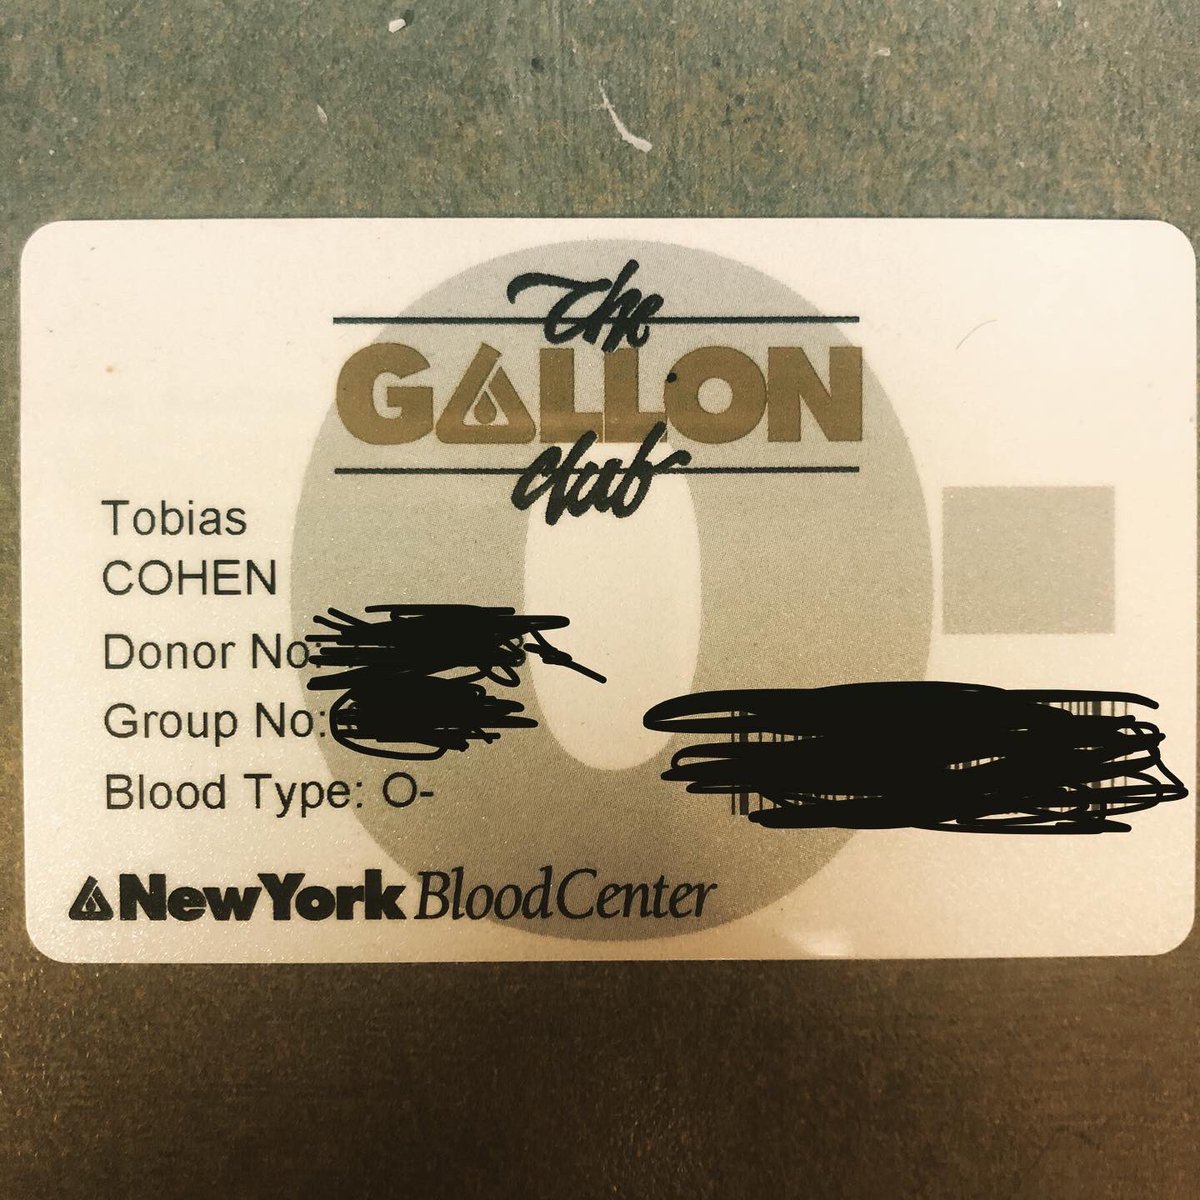 I’m one of the #doctorswhodonate and my last donation @NYBloodCenter made me a #gallonclubdonor having donated over 1 gallon of blood. Donate now and save lives! #nybc #nyp #weillcornellmedicine #pathology #clinicalpathology #bloodbank #transfusionmedicine #O- #redbloodcells